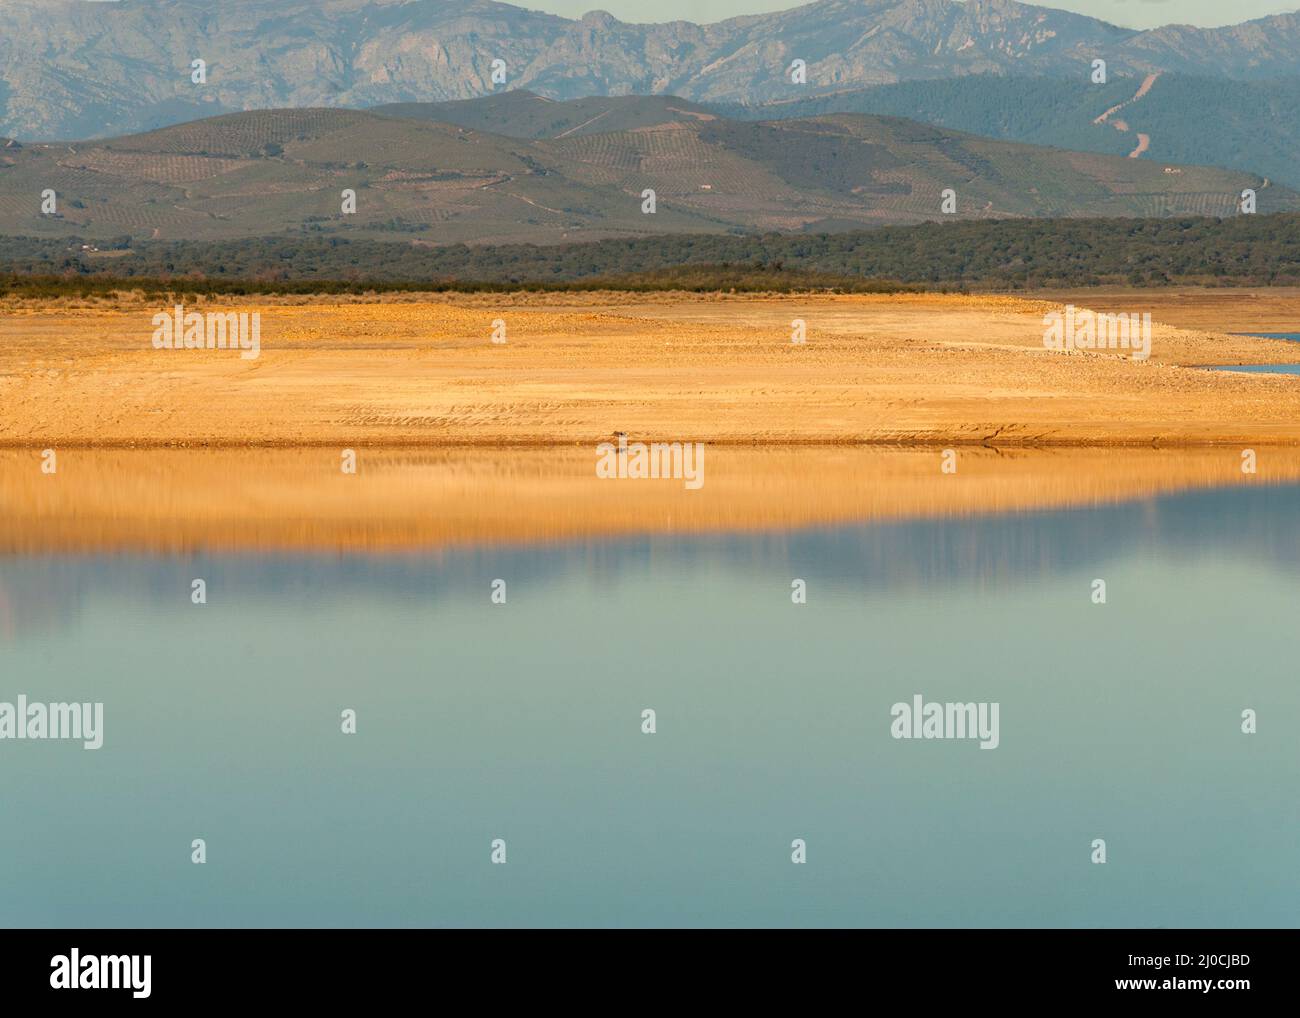 Low reservoir level as a result of drought and lack of rain in Embalse Gabriel y Galan, Extremadura, Spain Stock Photo